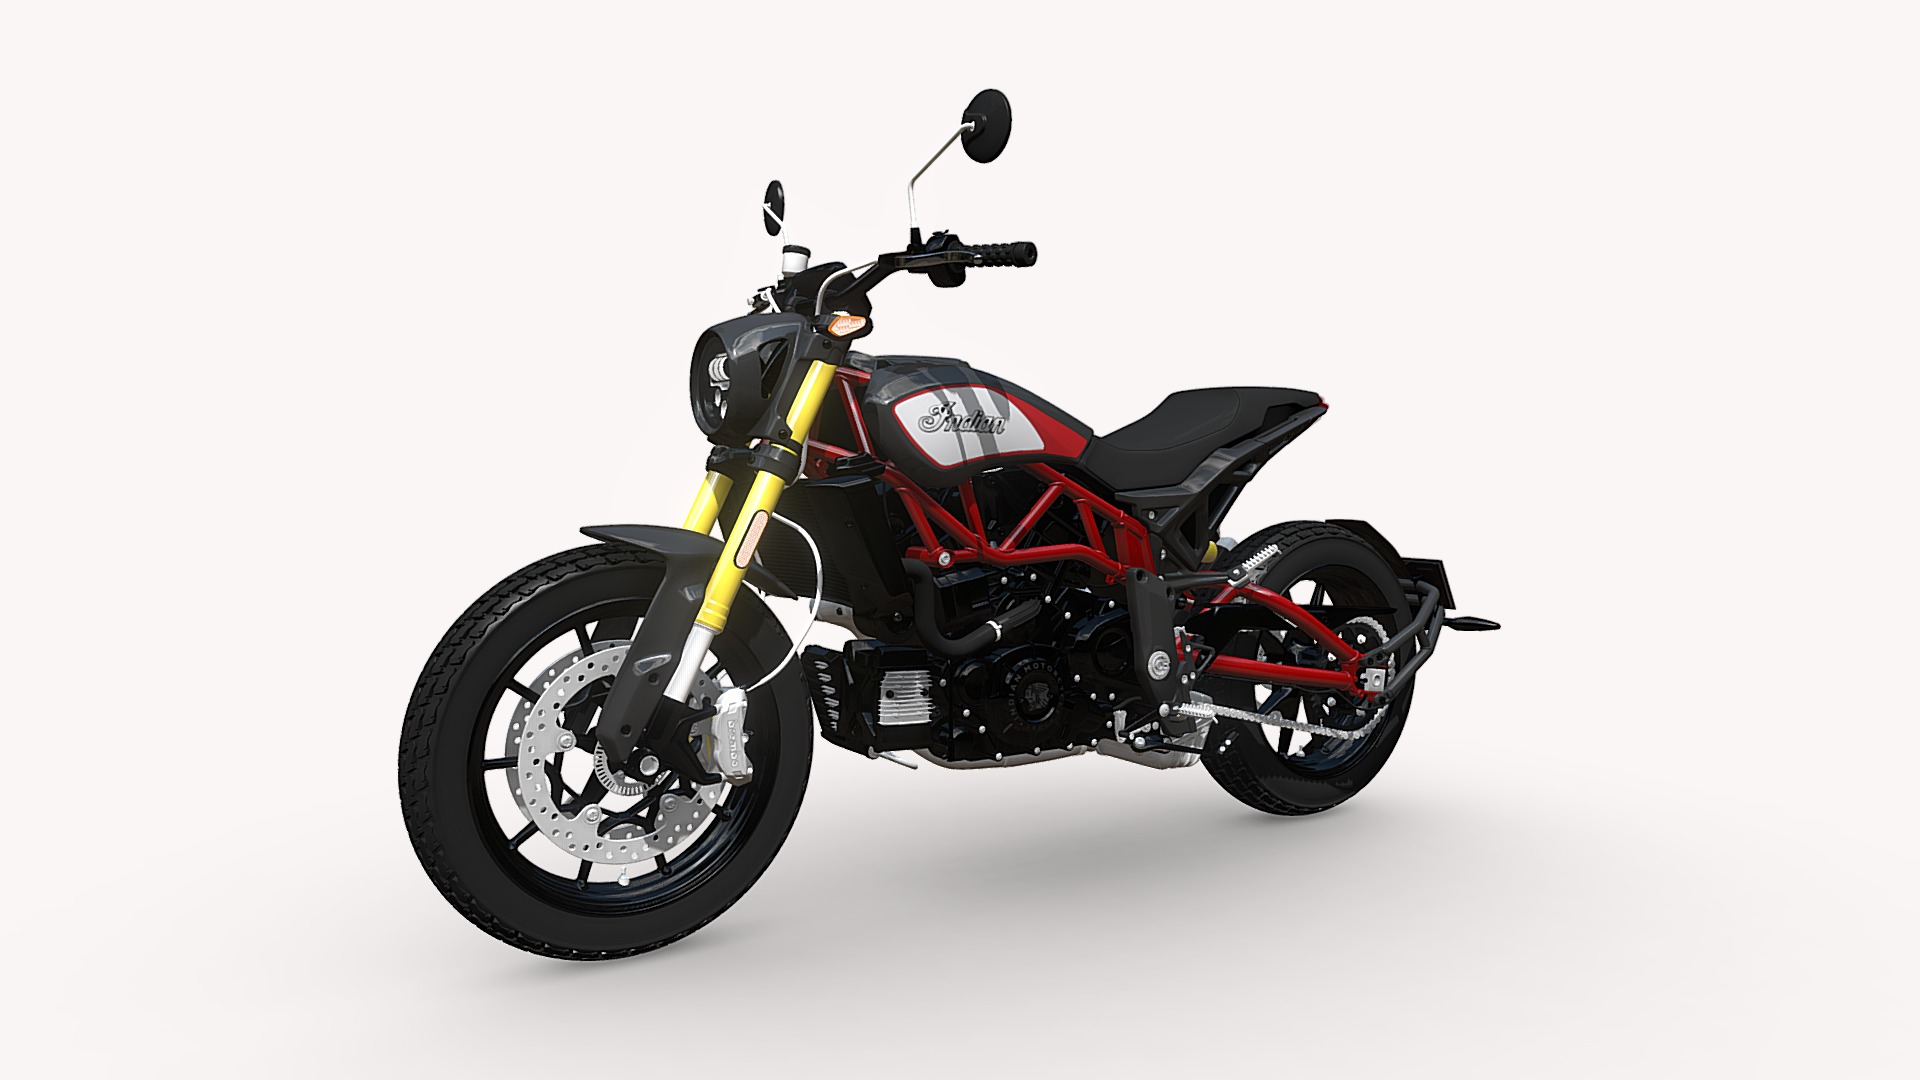 3D model Indian FTR 1200 S 2019 - This is a 3D model of the Indian FTR 1200 S 2019. The 3D model is about a black and red motorcycle.